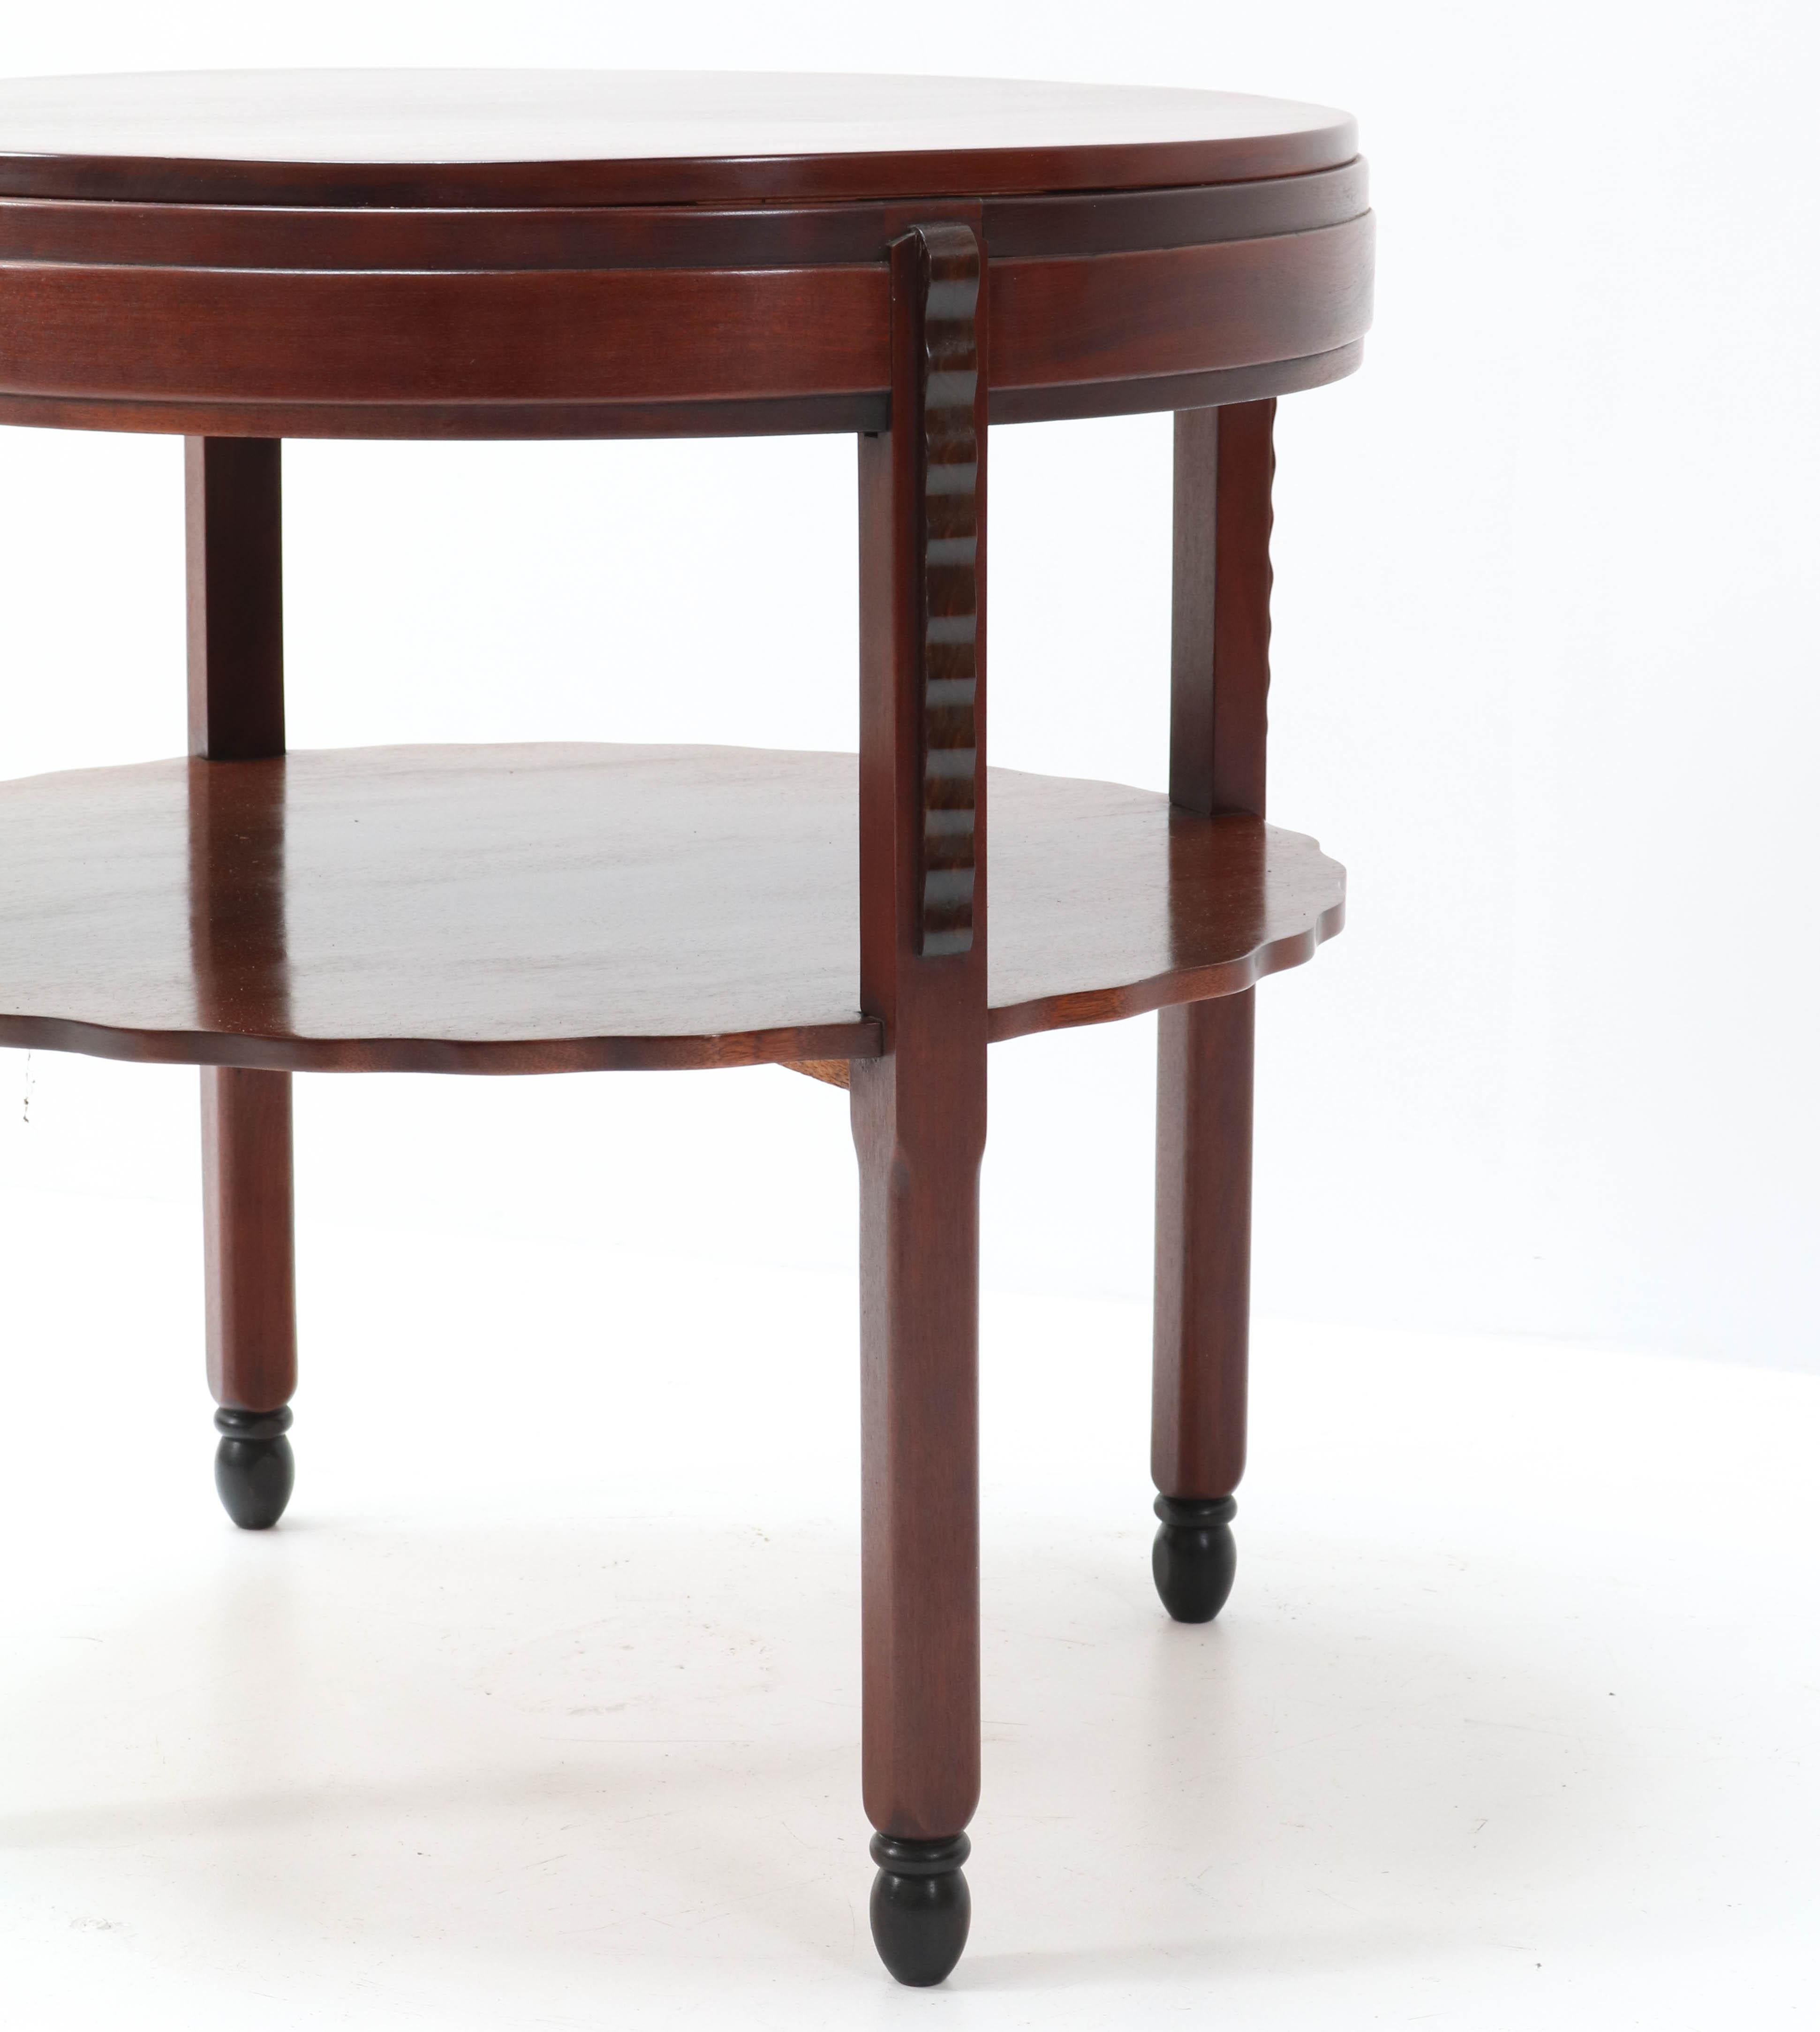 Early 20th Century Mahogany Art Deco Amsterdam School Coffee Table by Fa. Drilling Amsterdam, 1920s For Sale